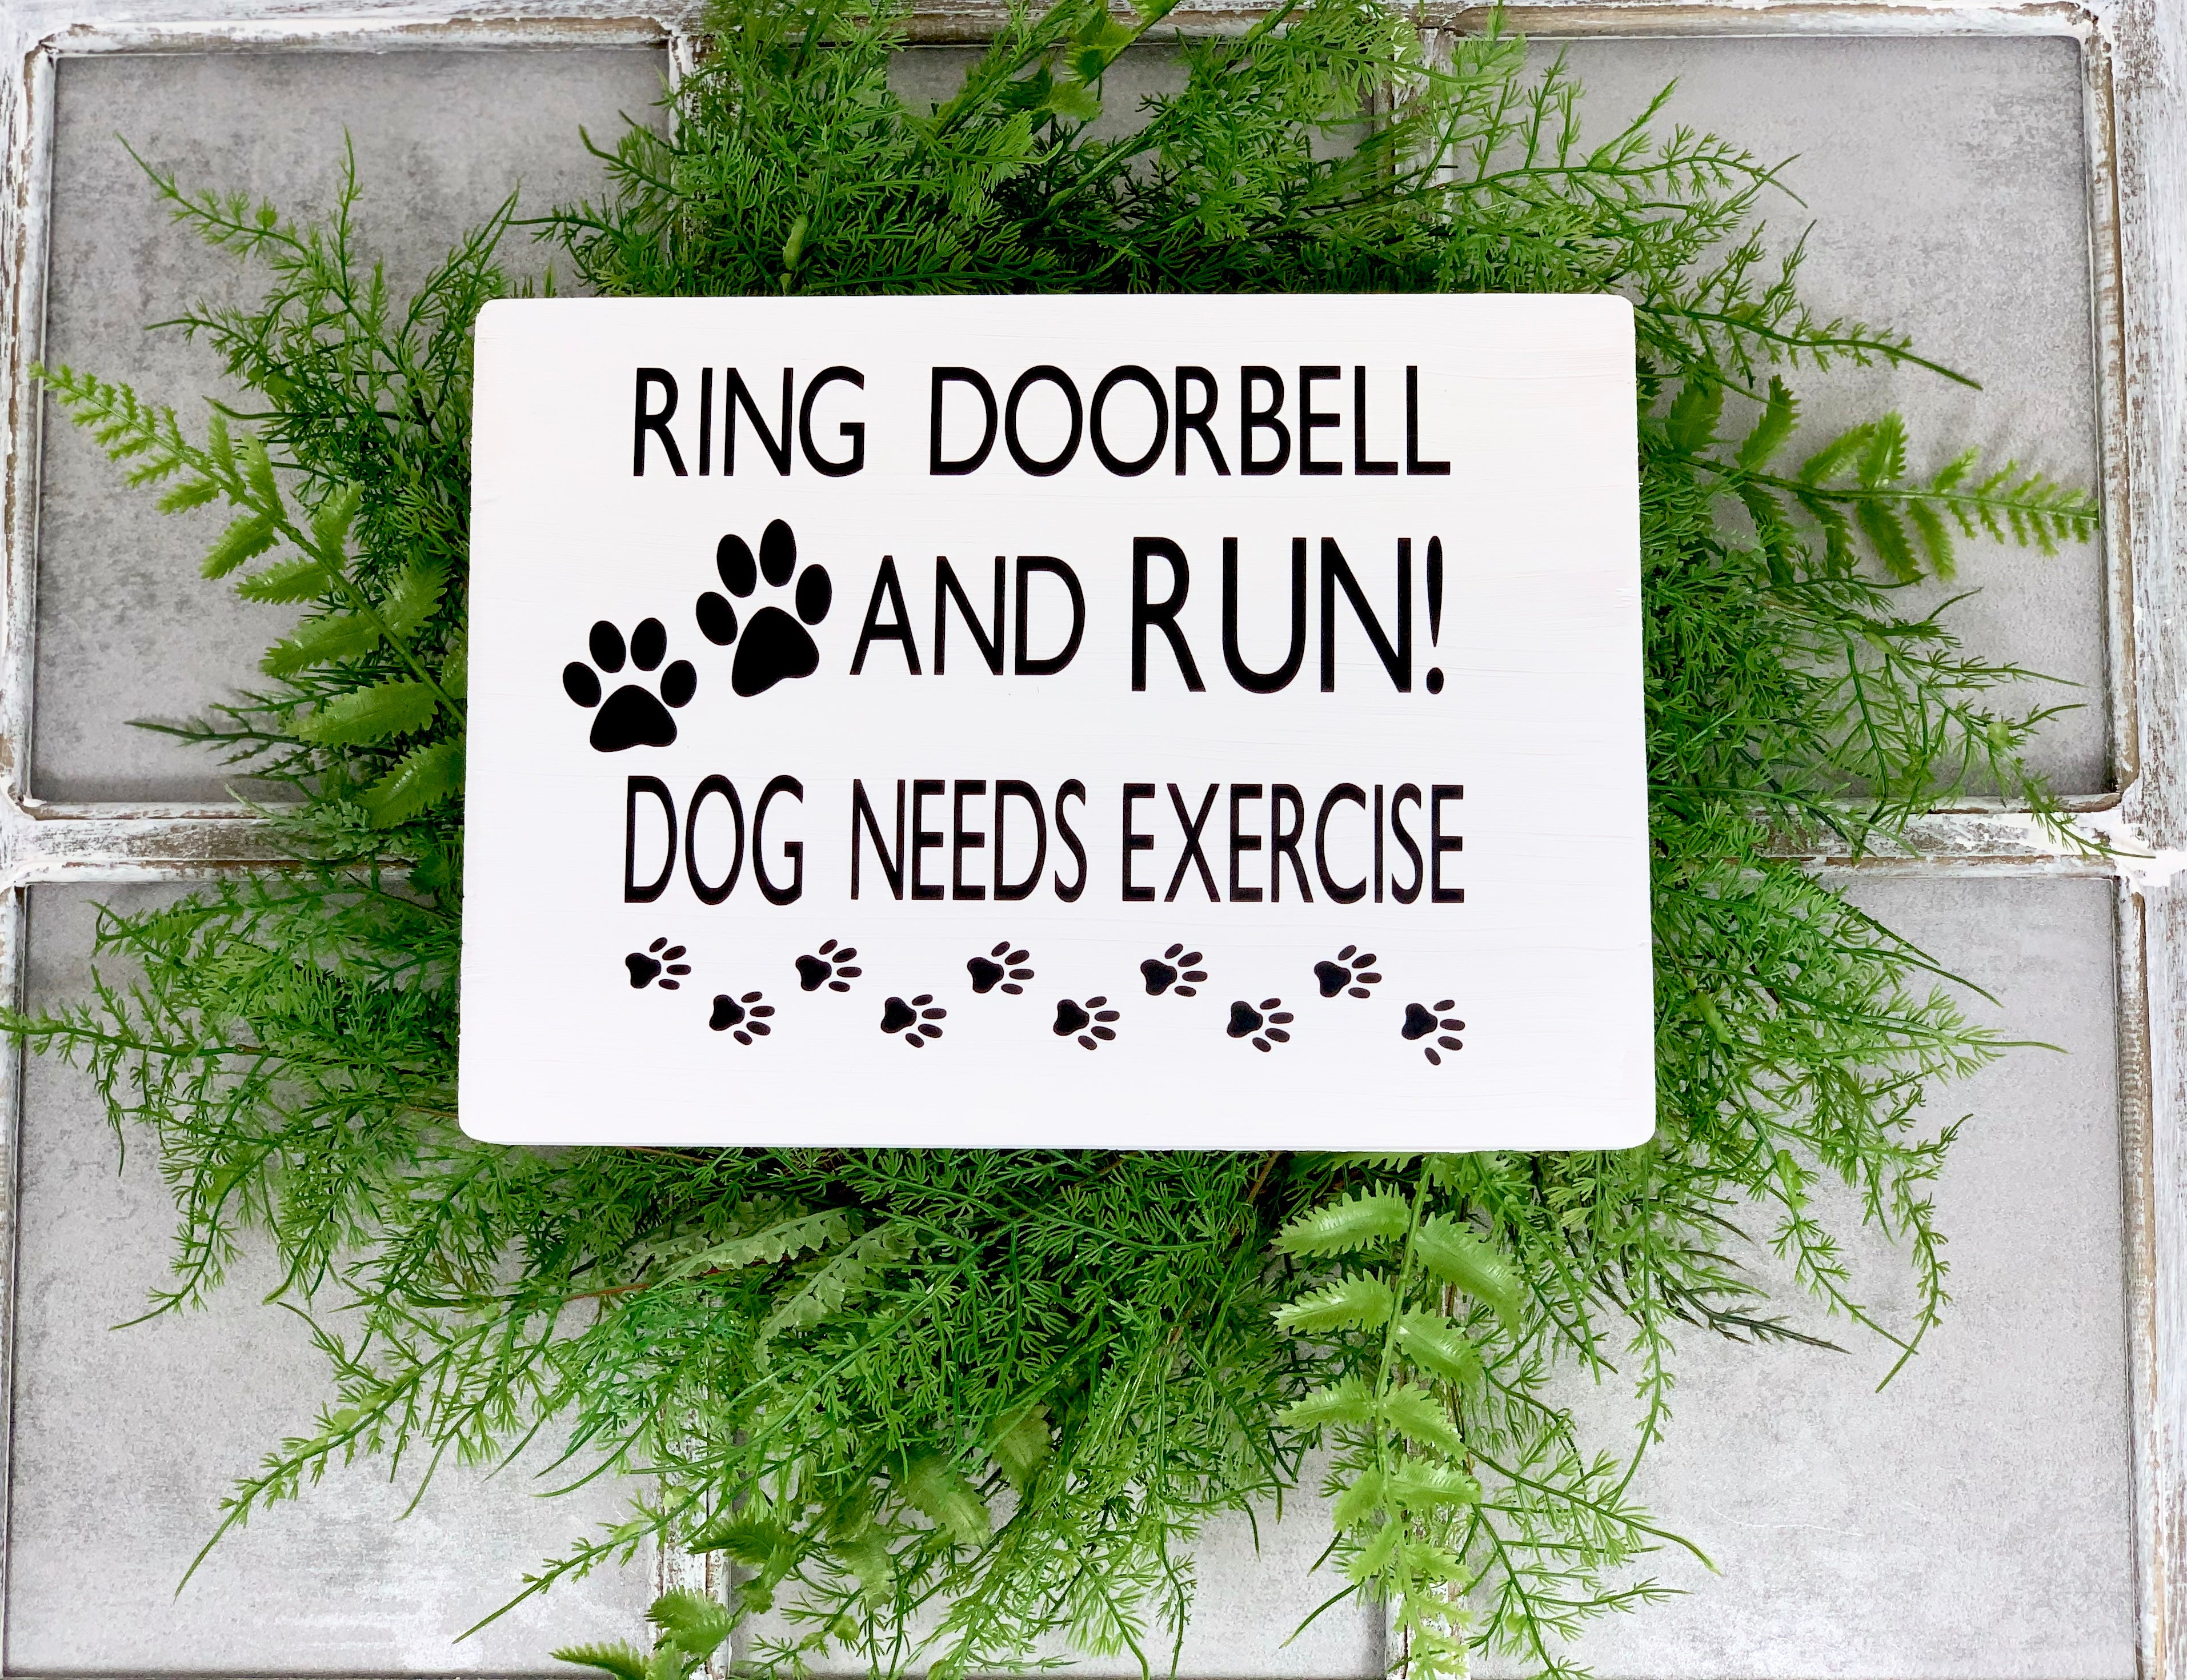 Amazon.com: ZOCO - Do Not Knock or Ring Doorbell Sticker - 6 Inch Round -  Leave Package at Door - Do Not Knock Sign - Inside Window Removable Decal :  Home & Kitchen